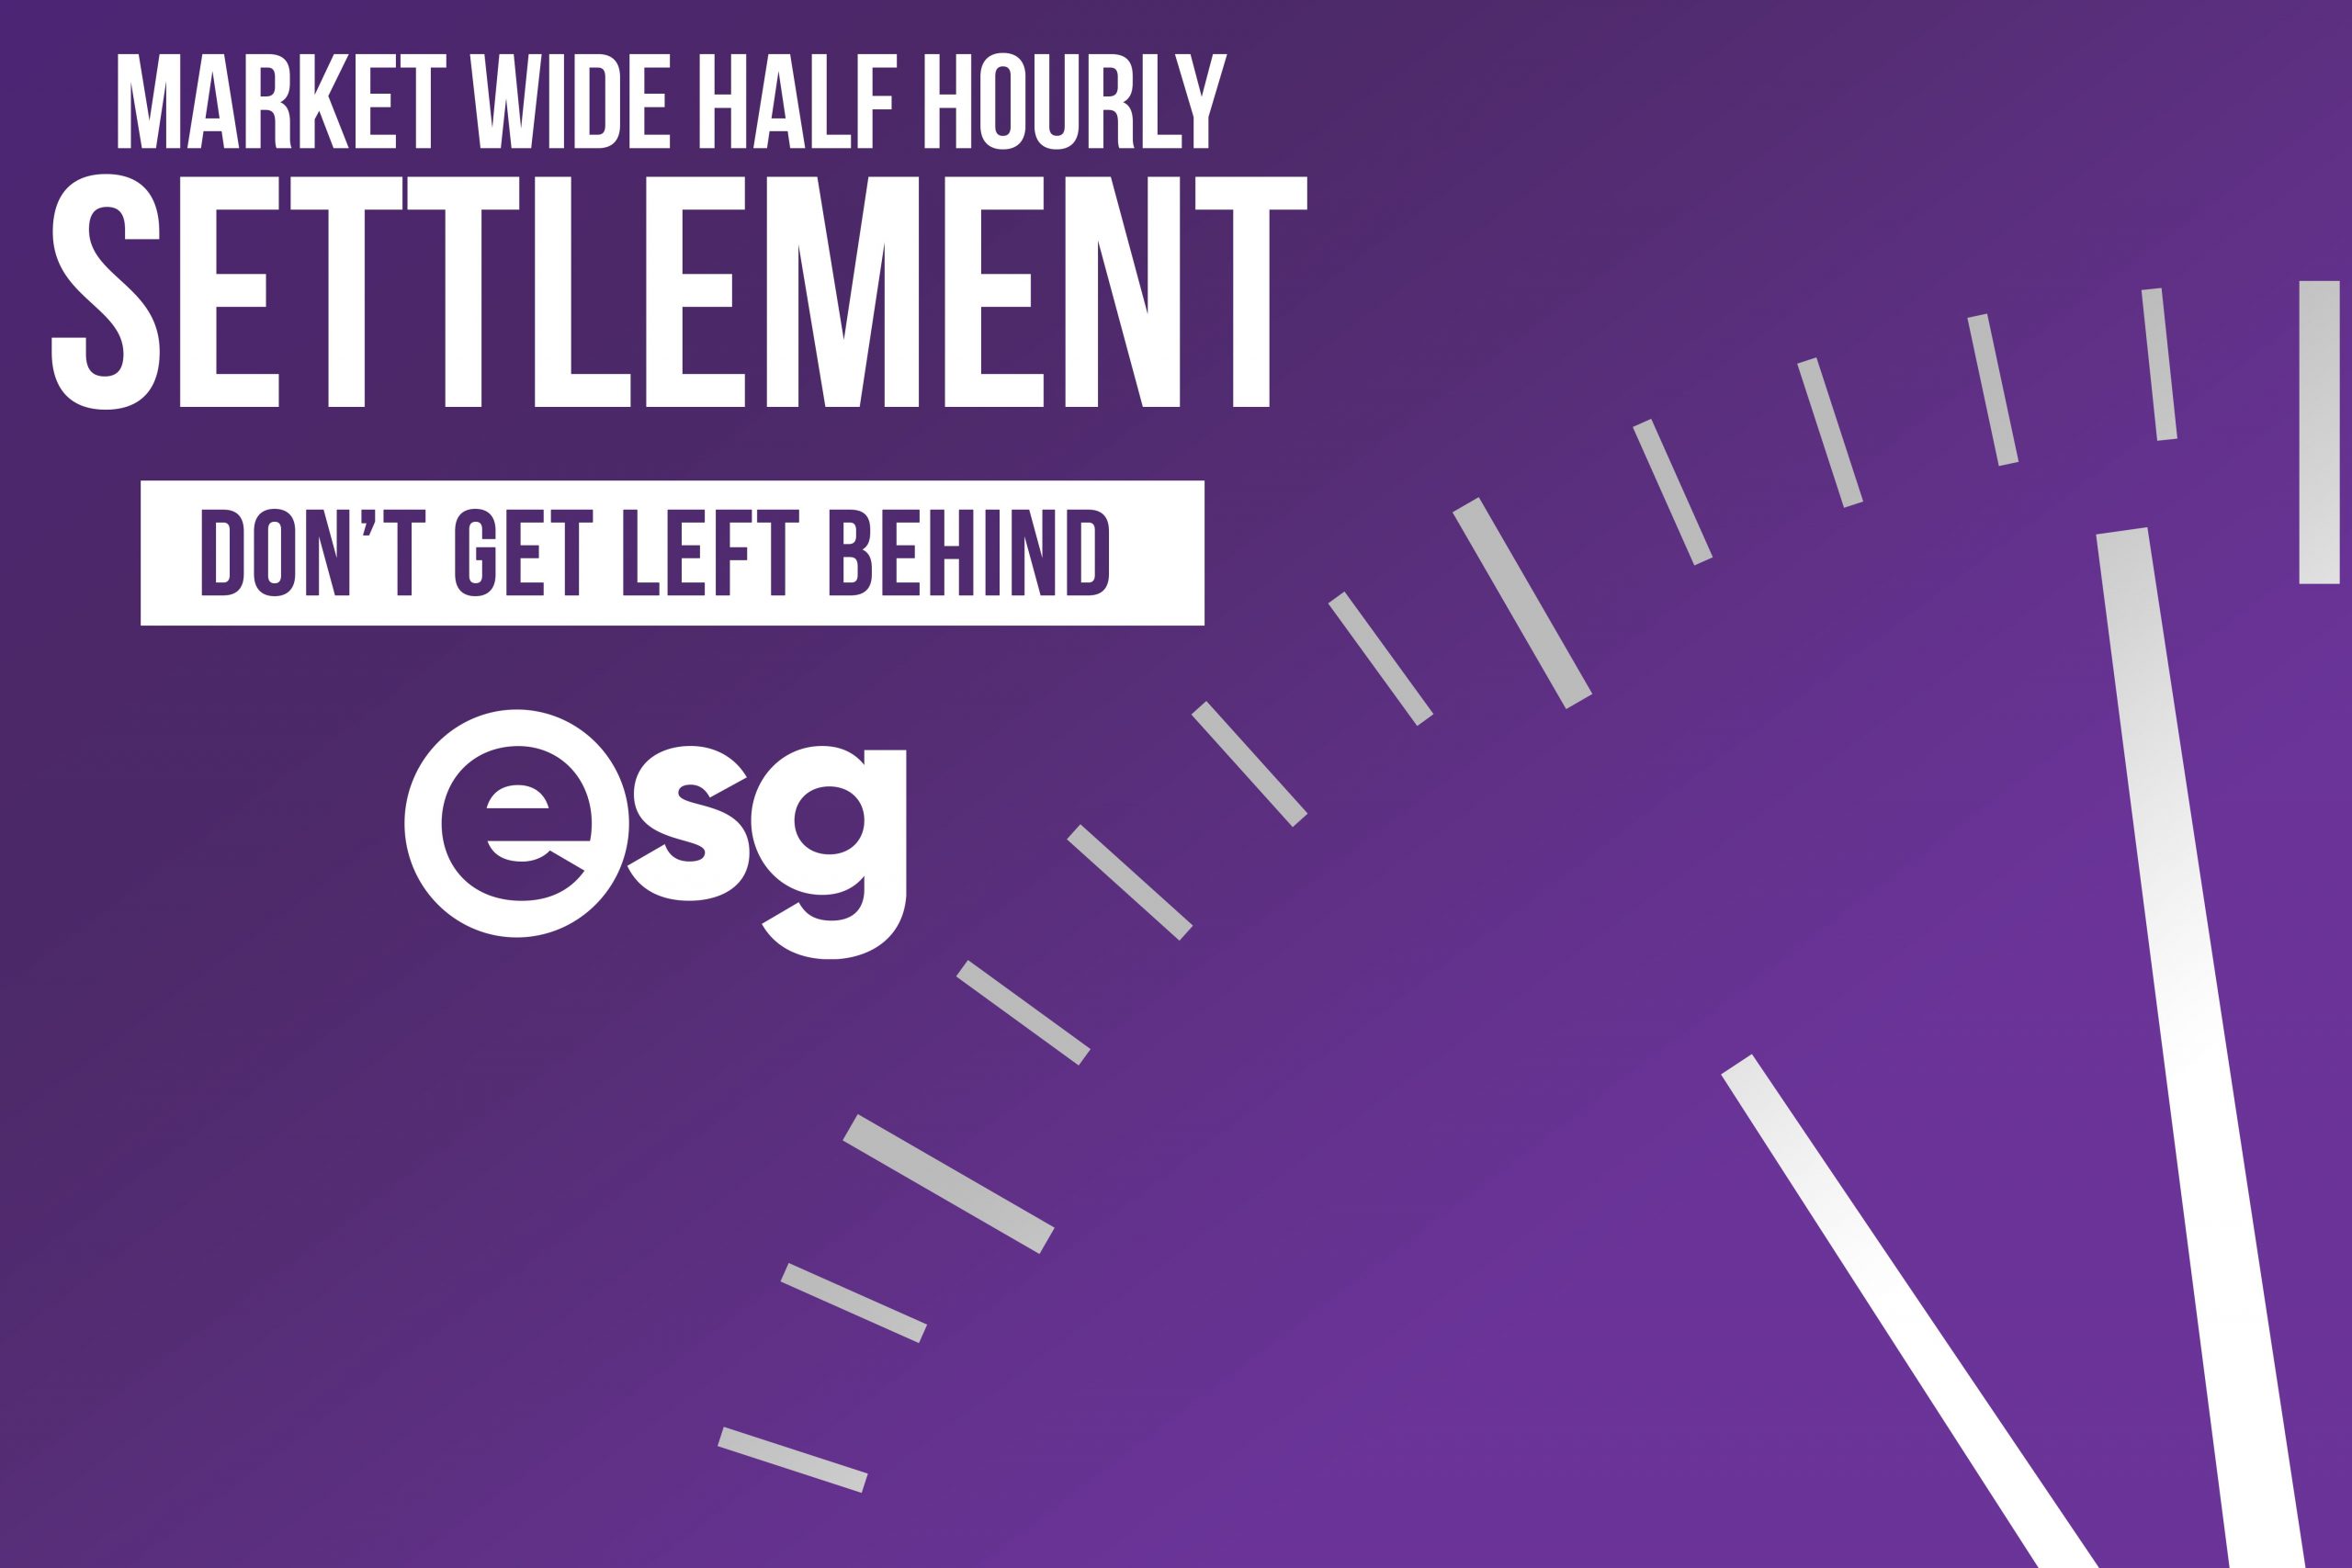 Our Supplier guide to Market Wide Half Hourly Settlement